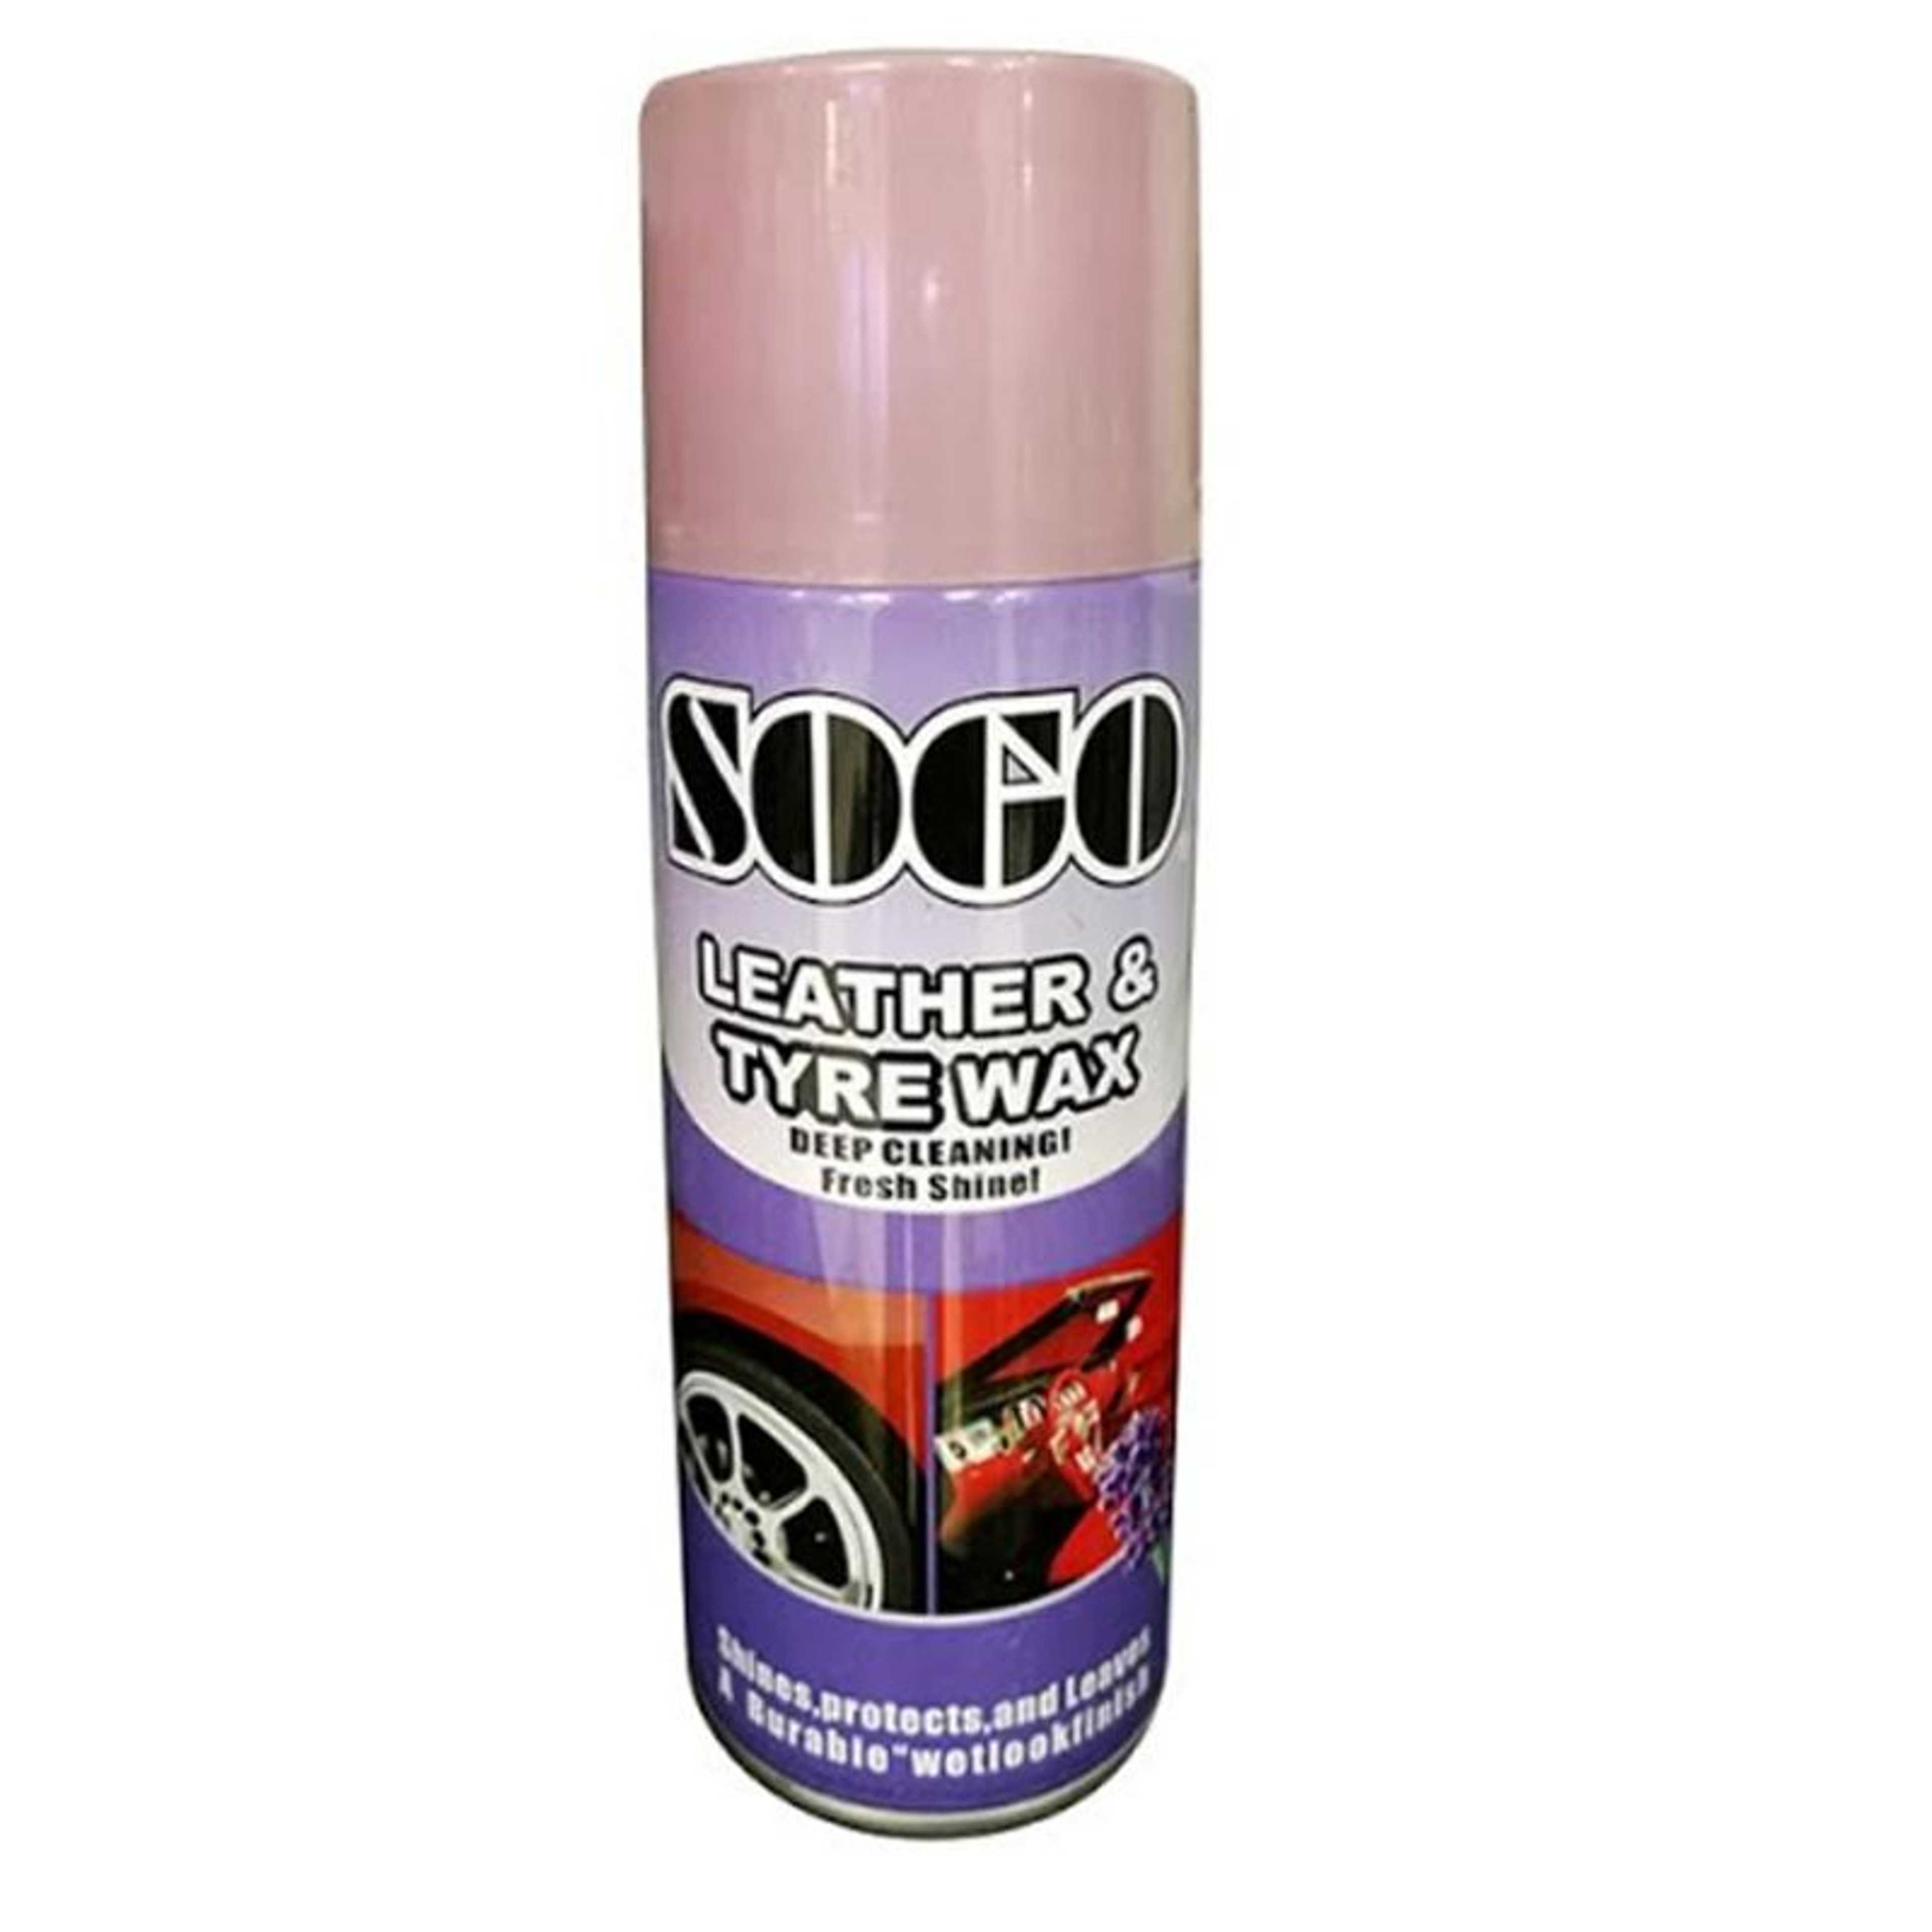 Sogo leather and tyre wax ---- dashboard spray ---- protectant spray